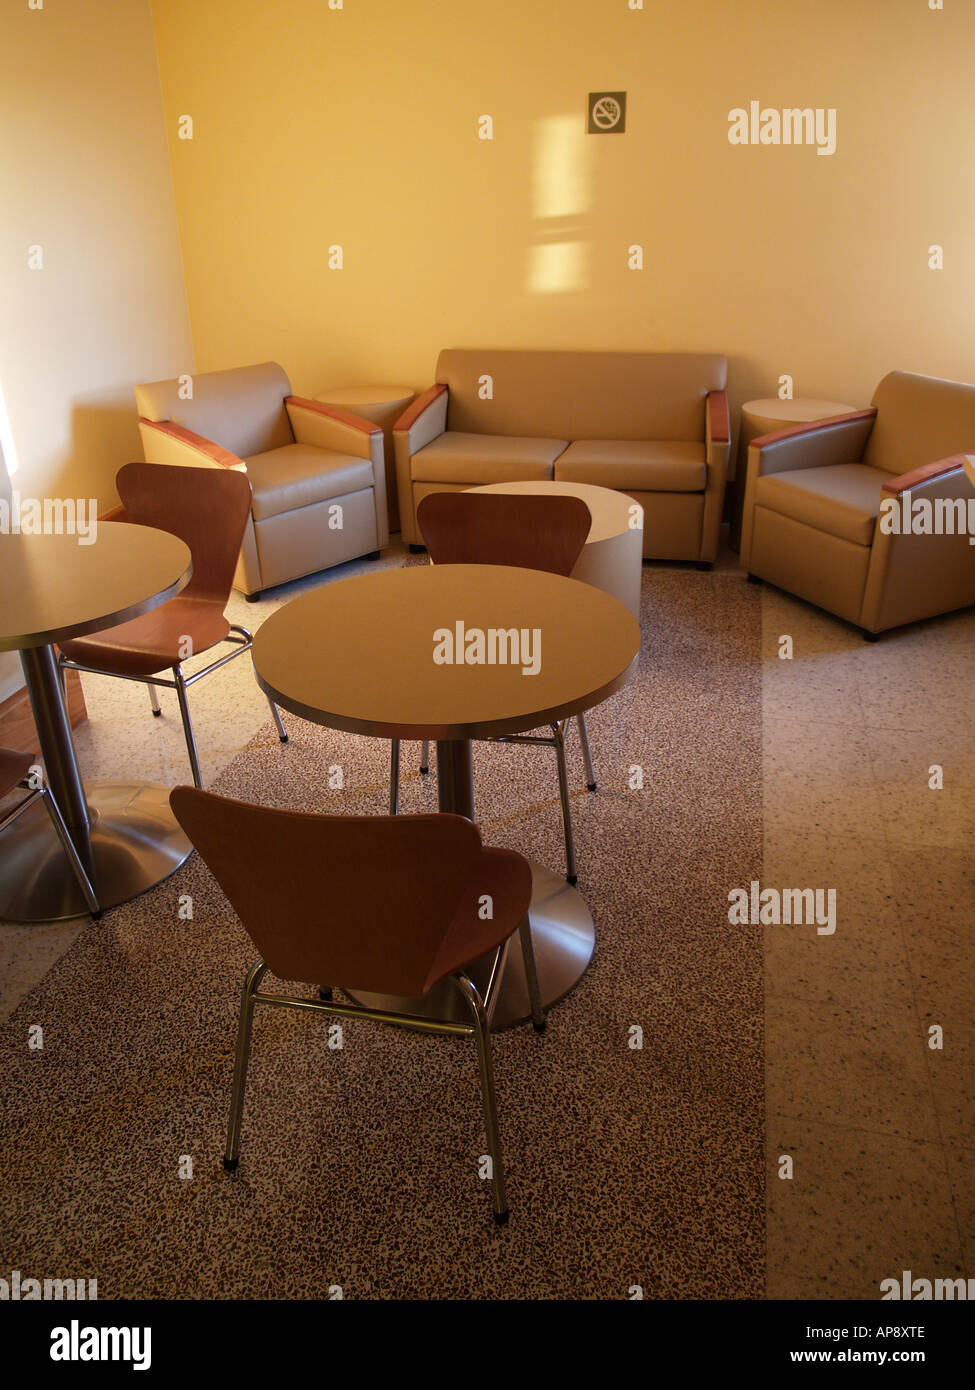 Interior of a lounge or waiting room with stuffed chairs and tables, naturally lit. Stock Photo